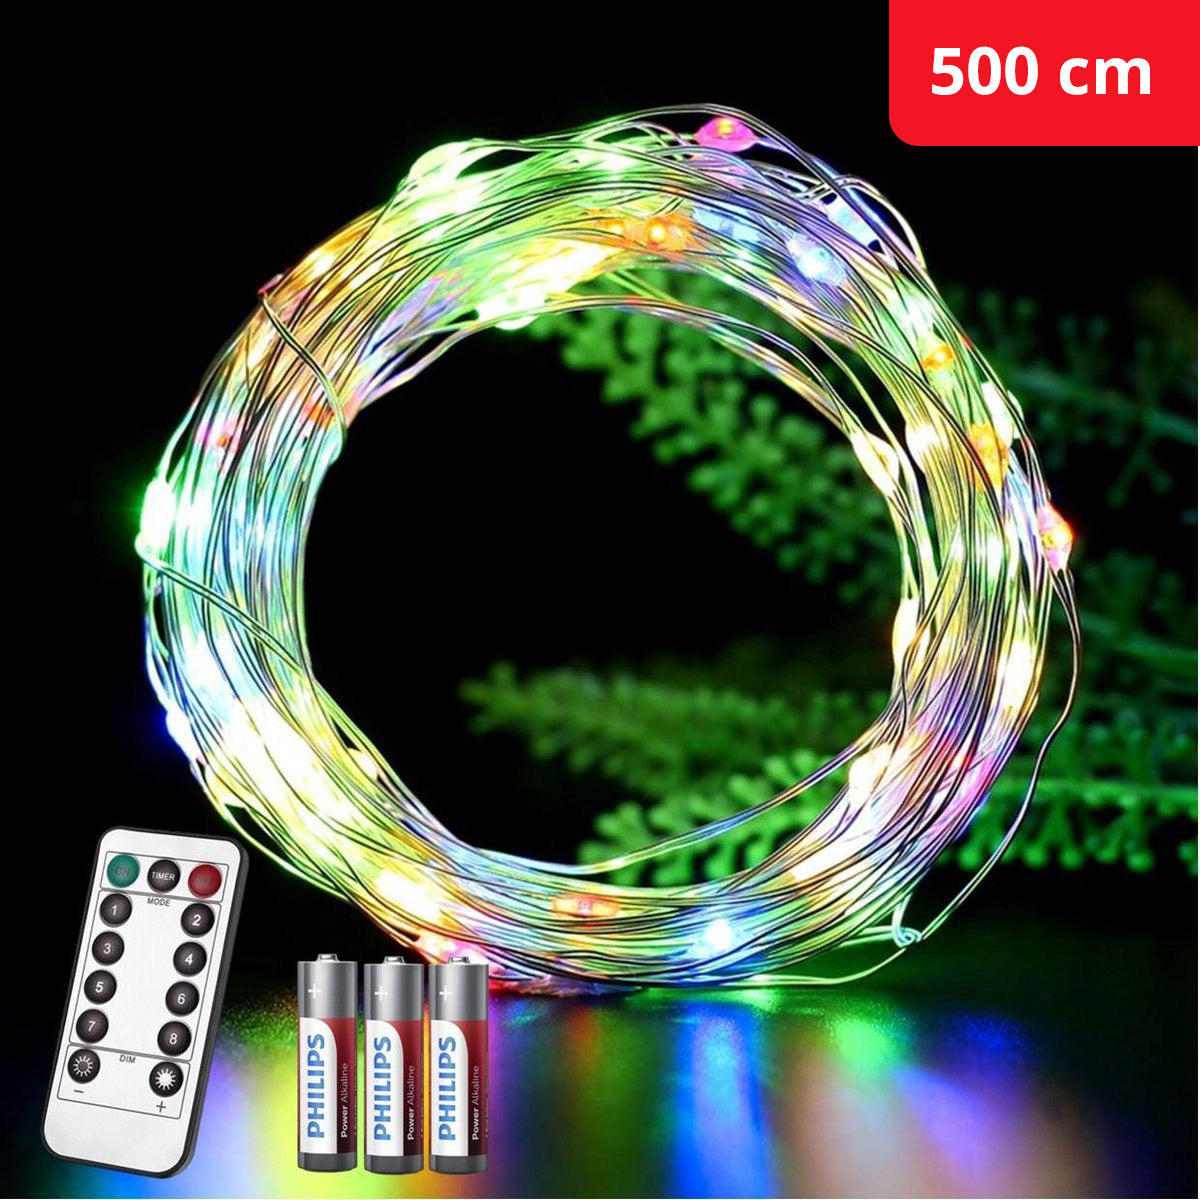 <tc>Ariko</tc> 50 LED 5 meter RGB color Christmas lights on batteries and remote control, including 3 Philips batteries